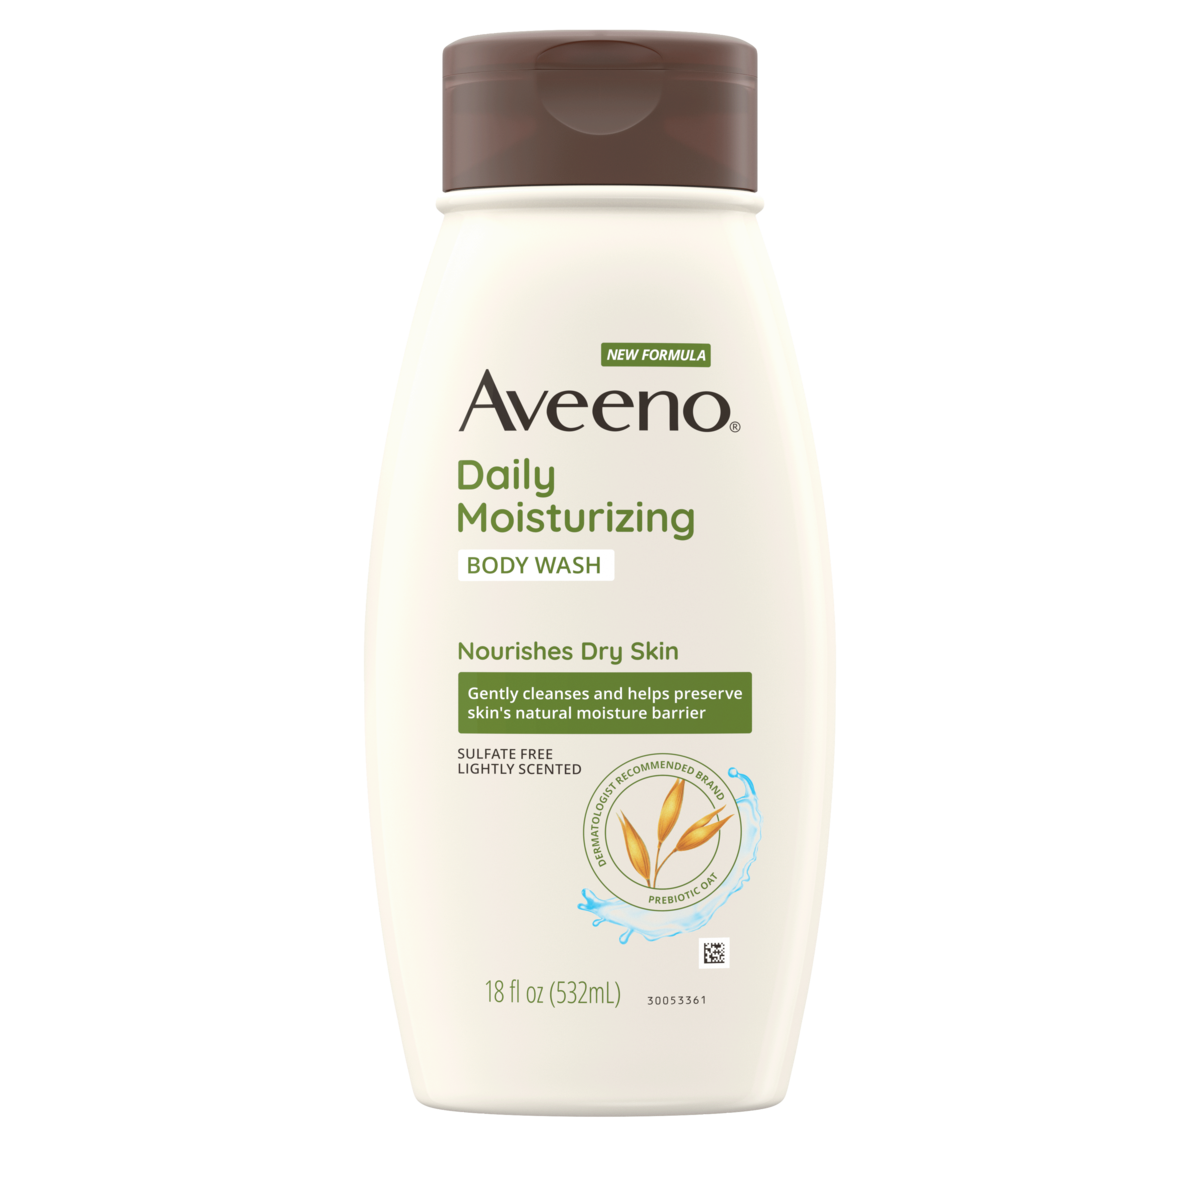 Aveeno Daily Moisturizing Body Wash with Prebiotic Oat Front